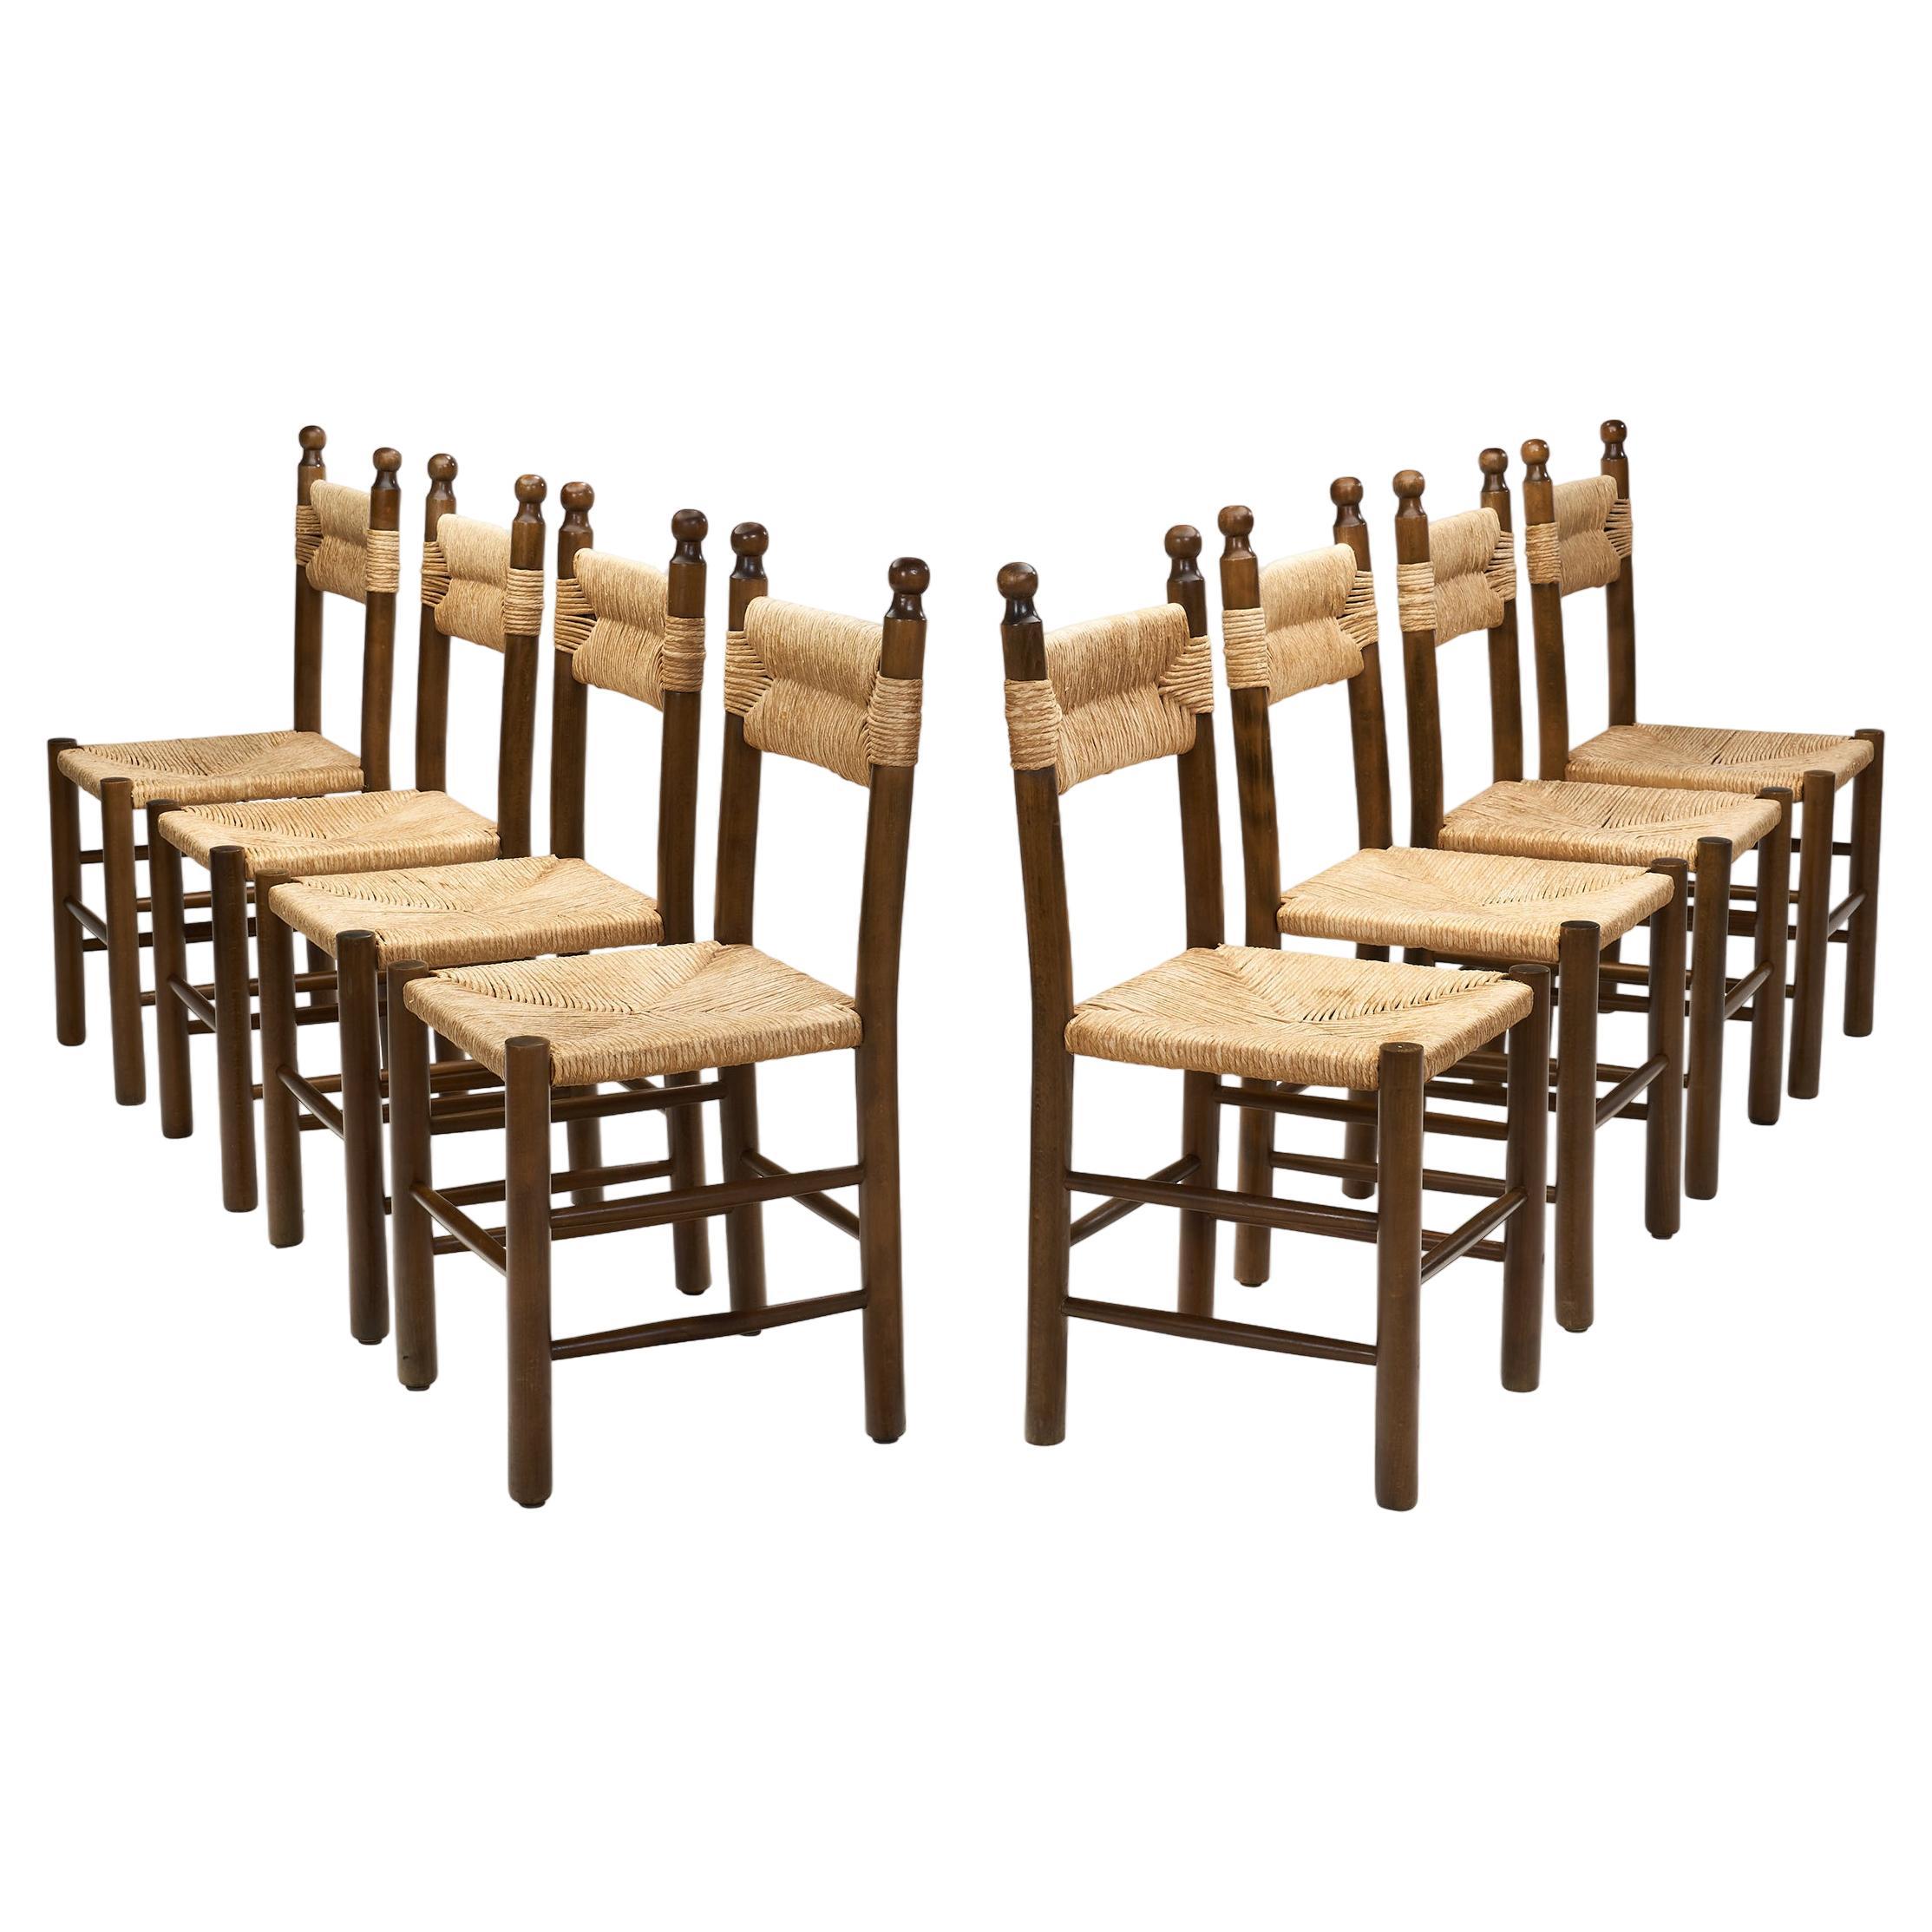 Eight Solid Wood and Straw Dining Chairs, Europe ca 1950s For Sale